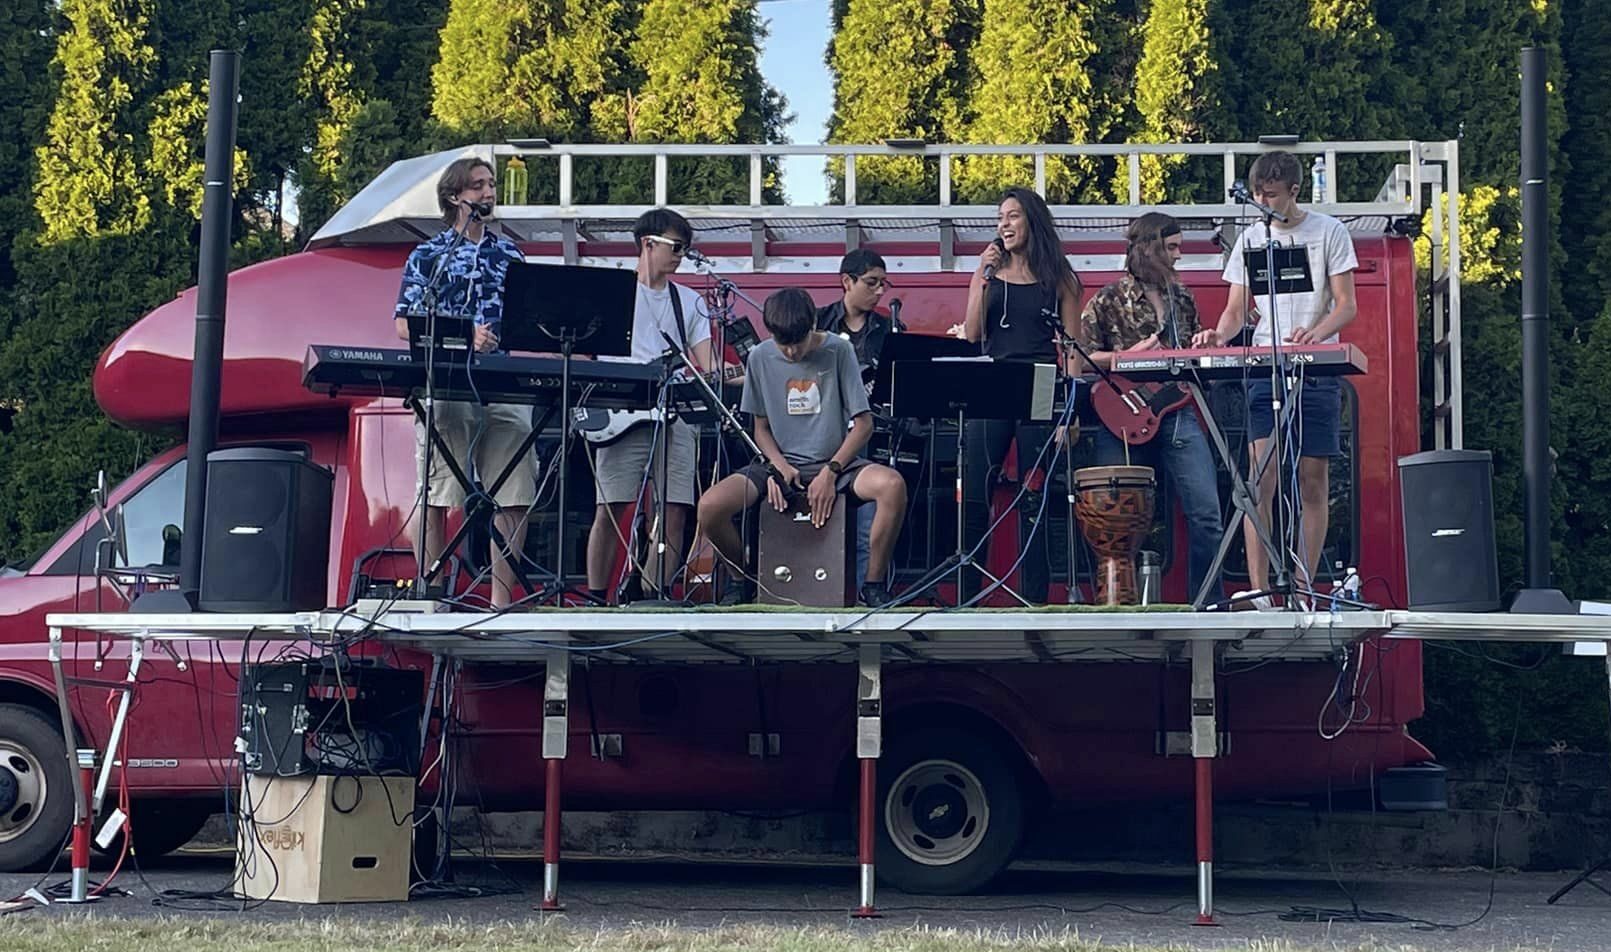 Students playing music on the Big Red Bus stage